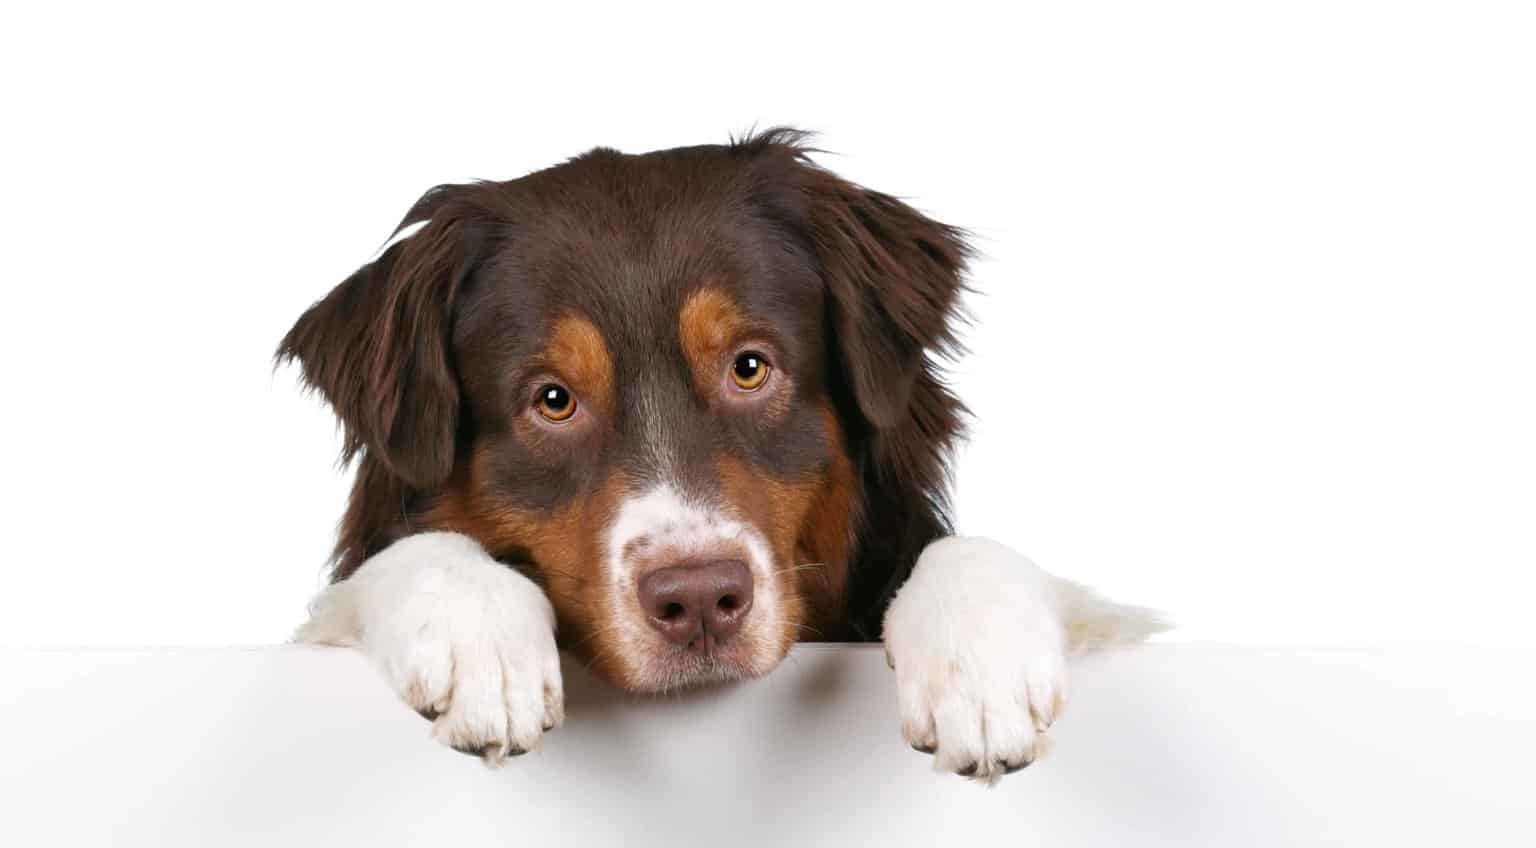 Sad Australian Shepherd on white background. Pet CDB treats and chews are an easy way to get your dog to ingest a cannabidiol extract, particularly if they love eating treats.